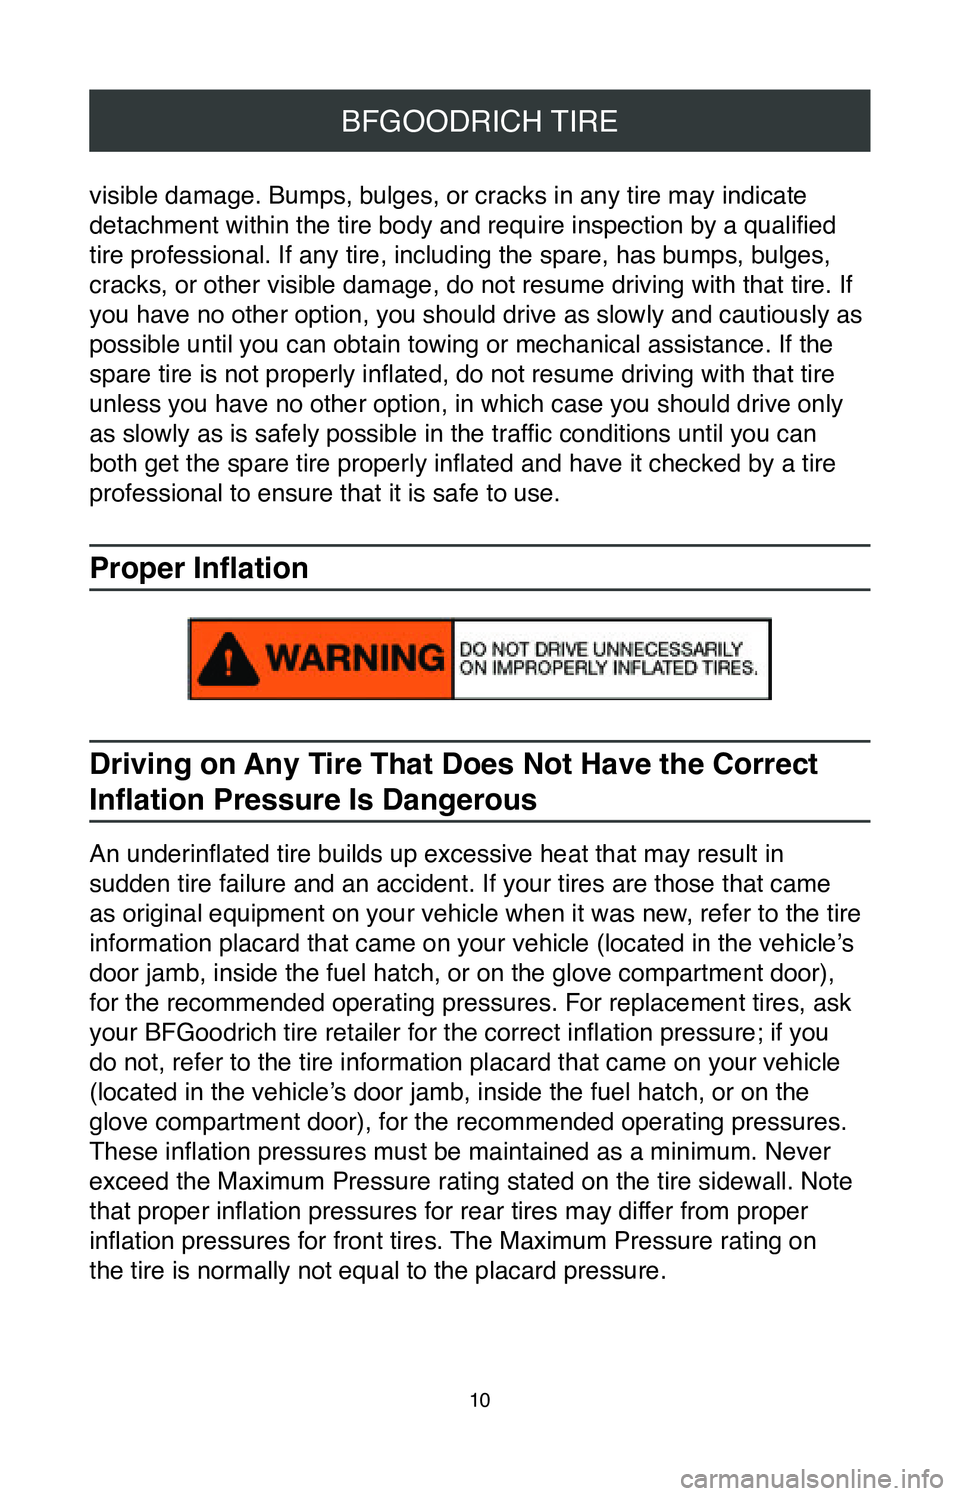 TOYOTA CAMRY 2020  Warranties & Maintenance Guides (in English) 10
BFGOODRICH TIRE
visible damage. Bumps, bulges, or cracks in any tire may indicate 
detachment within the tire body and require inspection by a qualified 
tire professional. If any tire, including t